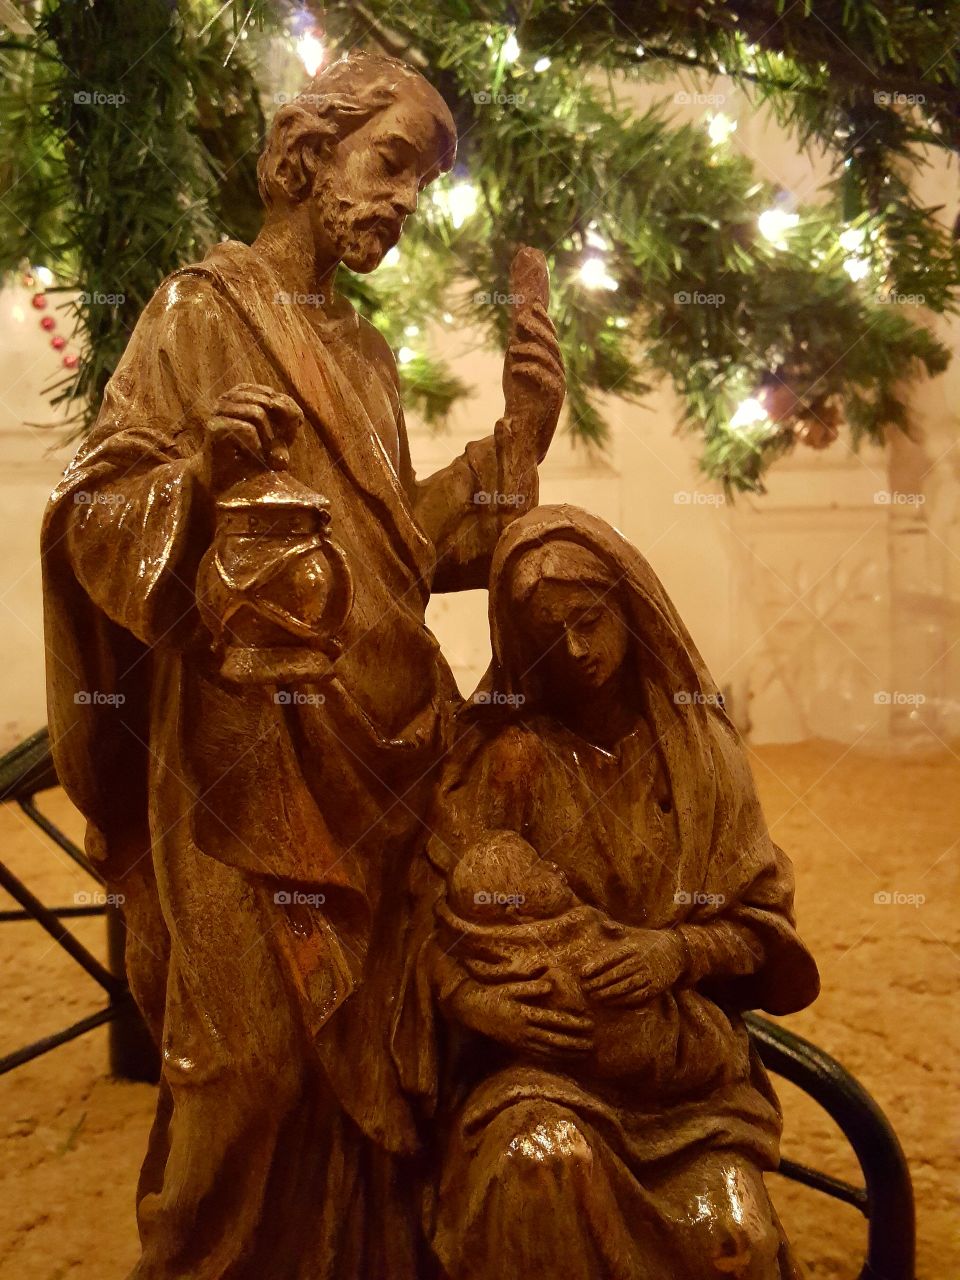 I absolutely love nativities, especially those that look carved, whether faux or not. This is just a piece of what could become a larger nativity scene, but I still love it.